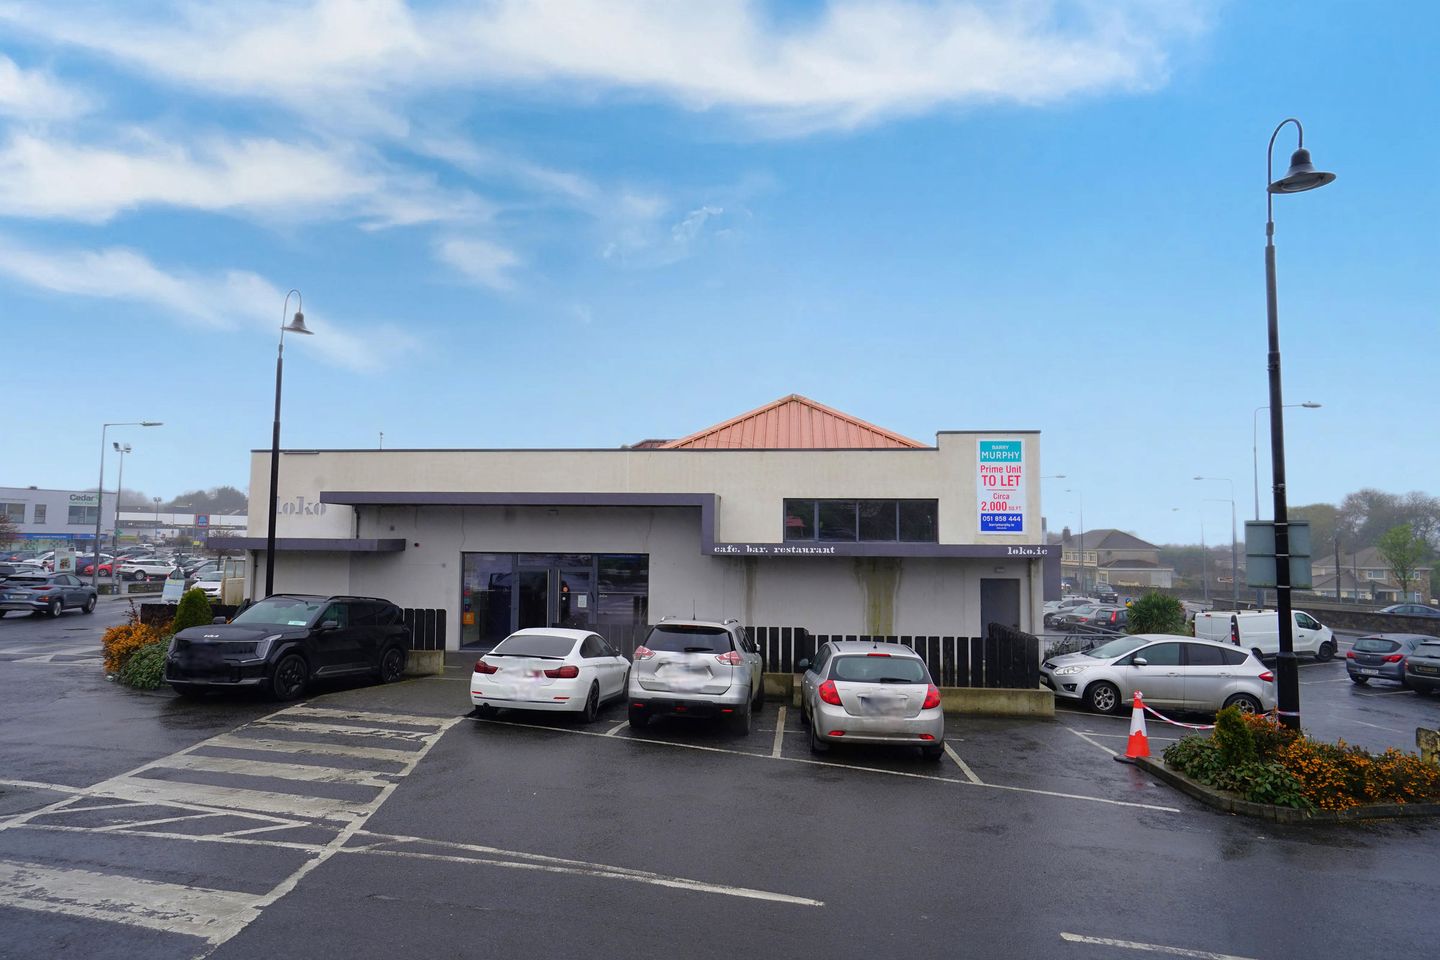 Ardkeen Shopping Centre, Dunmore Road, Ardkeen, Co. Waterford